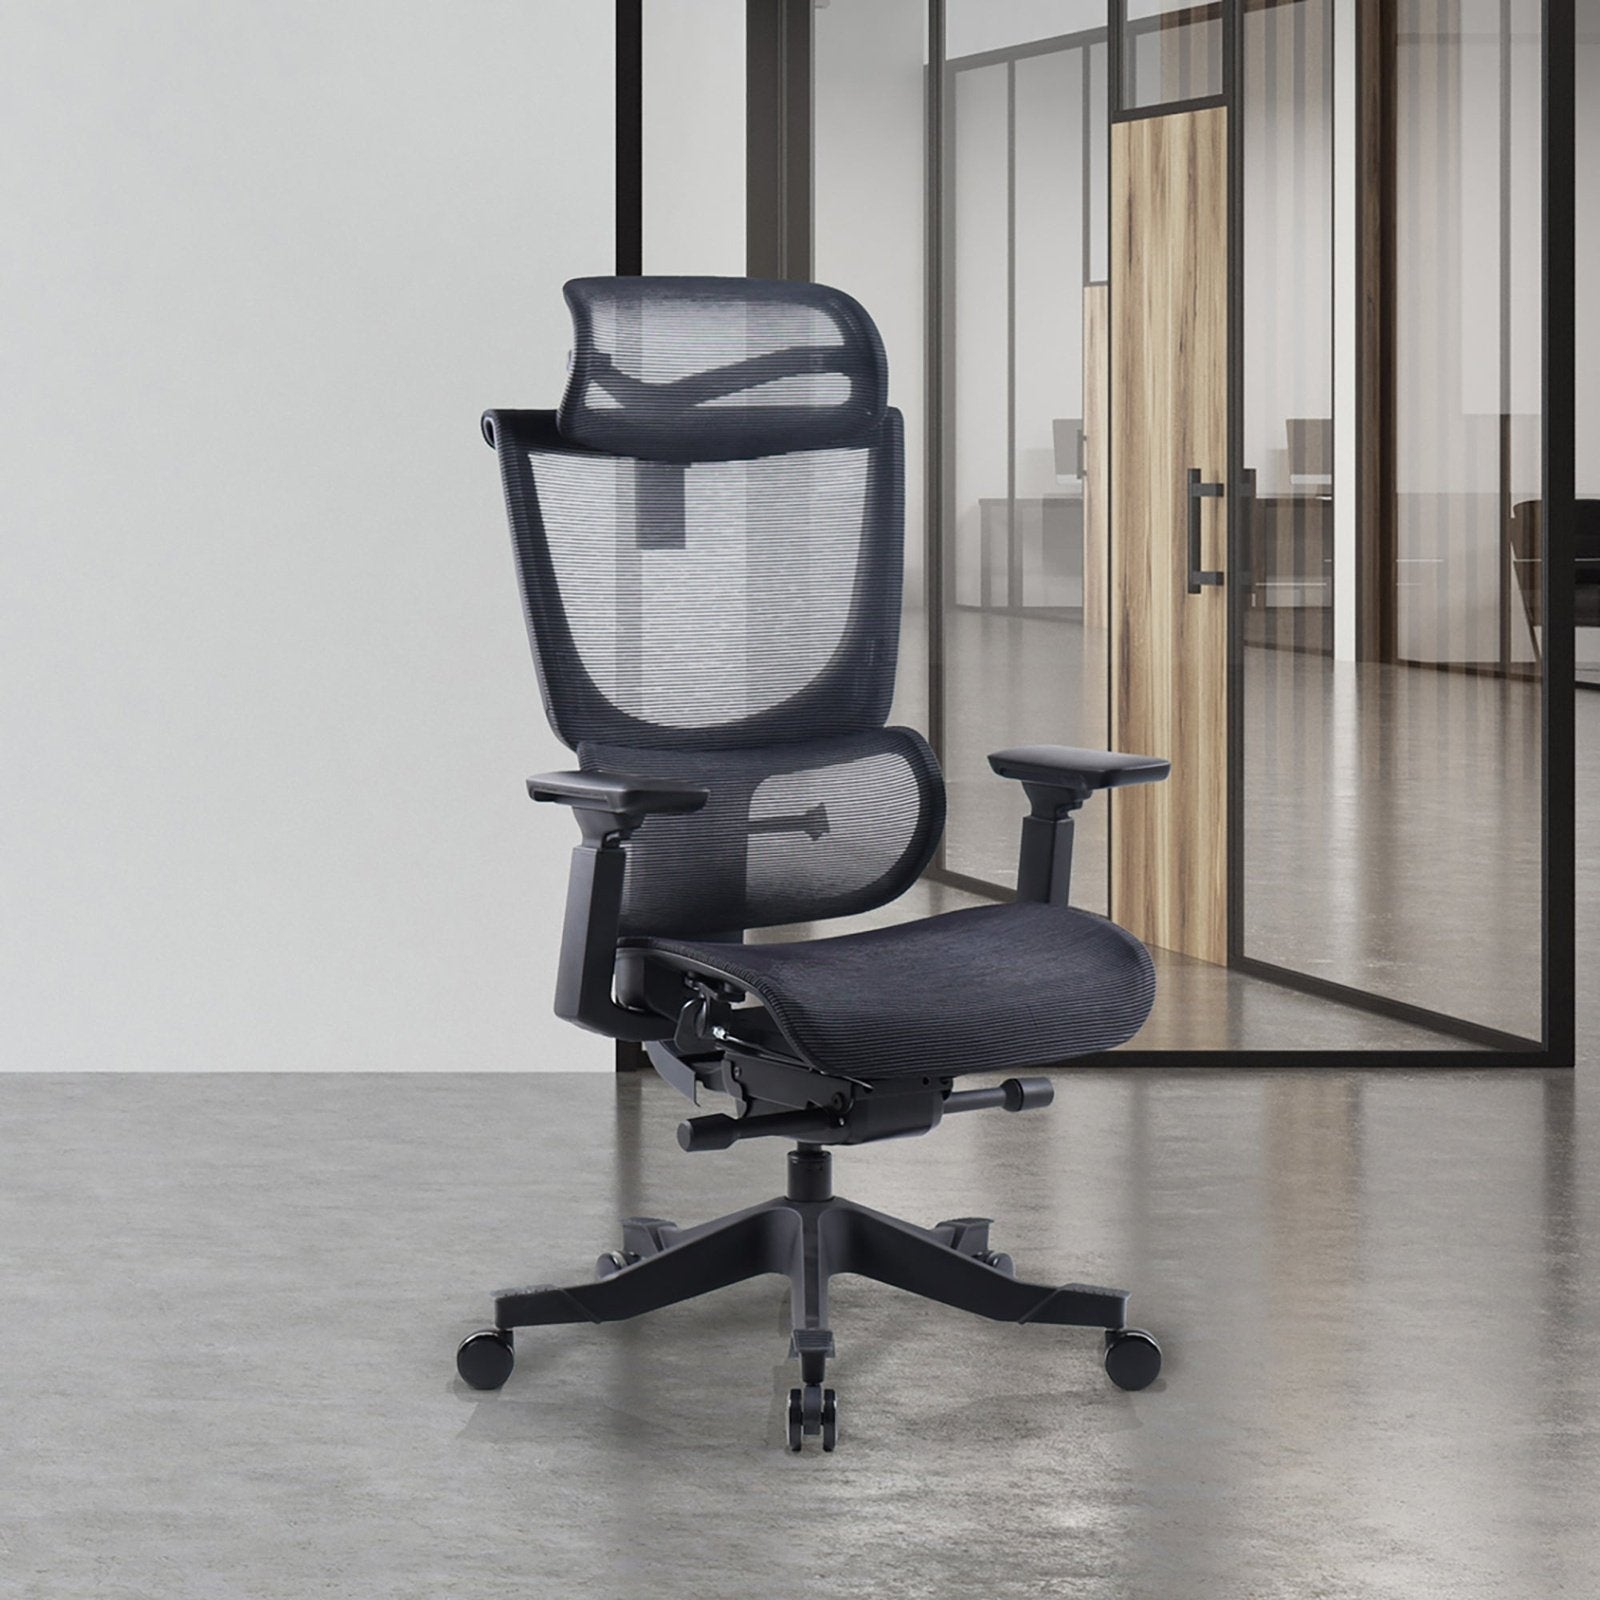 Elise back operator chair with headrest and black mesh seat - Office Products Online